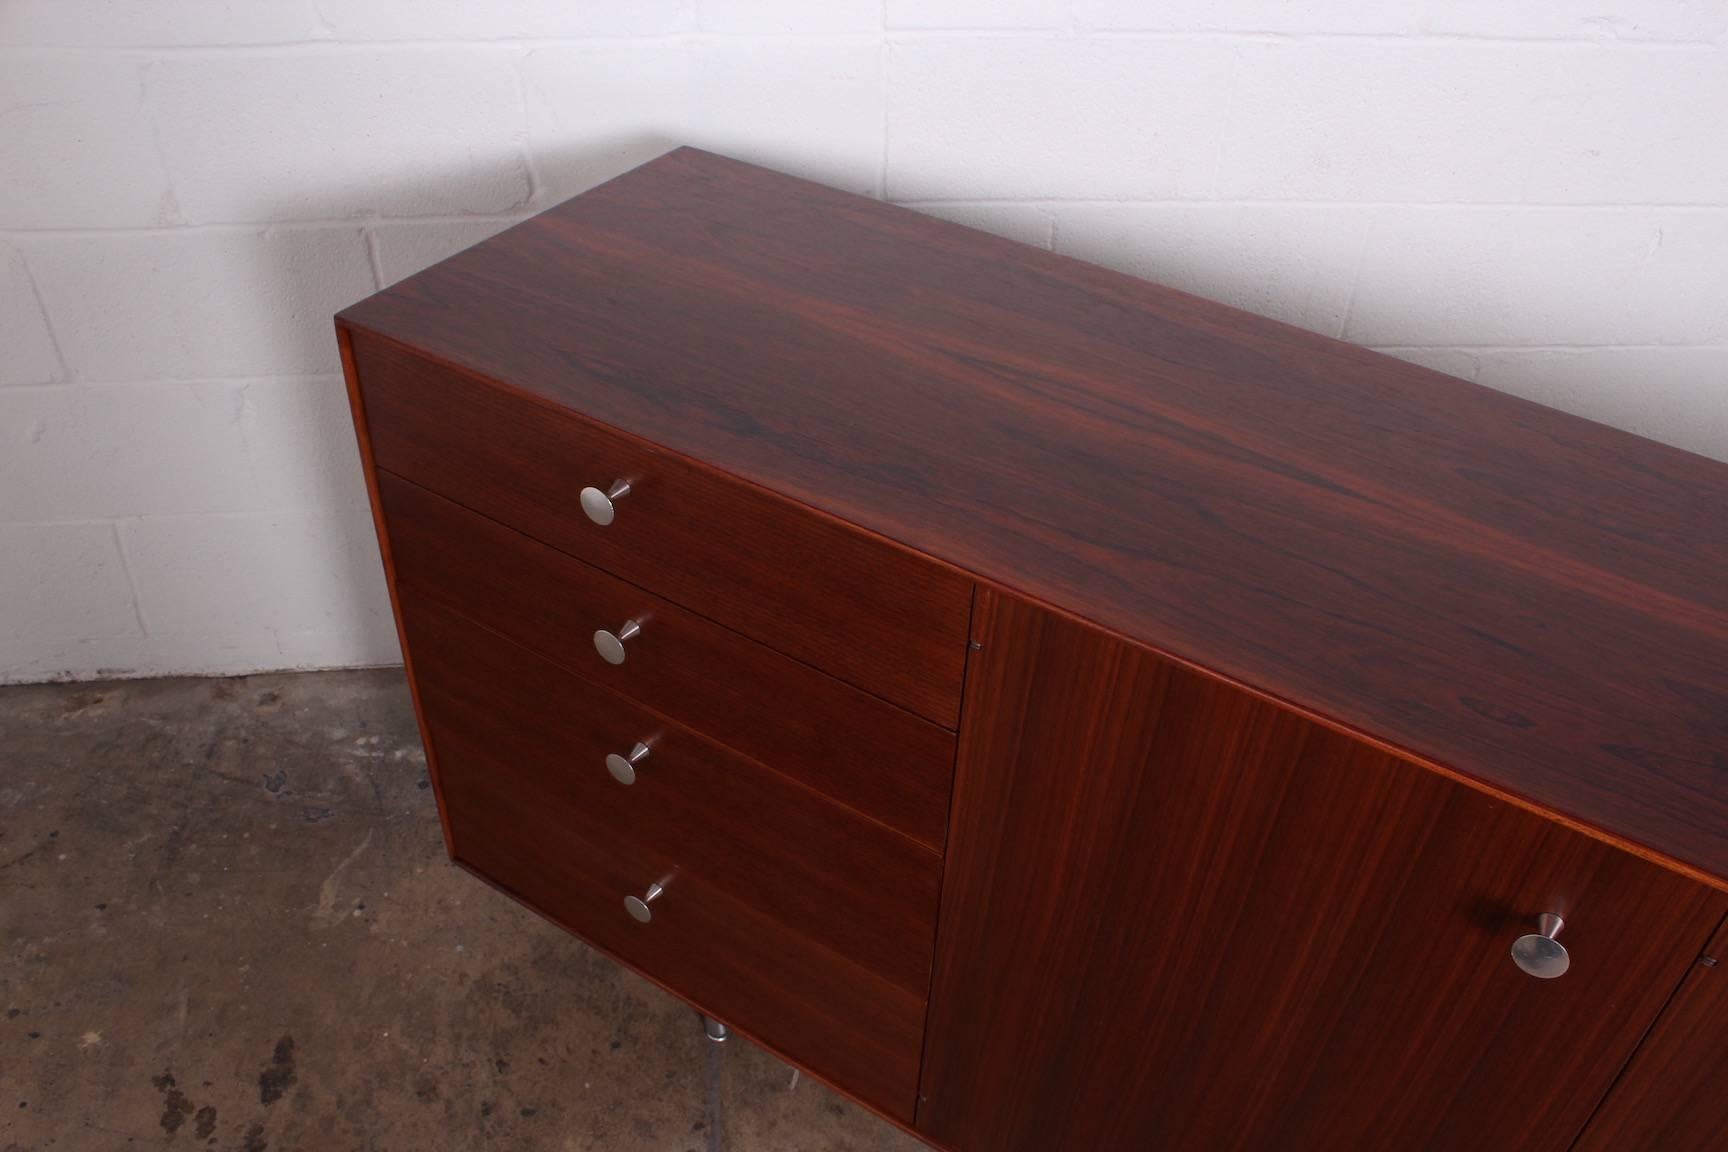 A thin edge cabinet designed by George Nelson for Herman Miller with rosewood case and walnut doors.